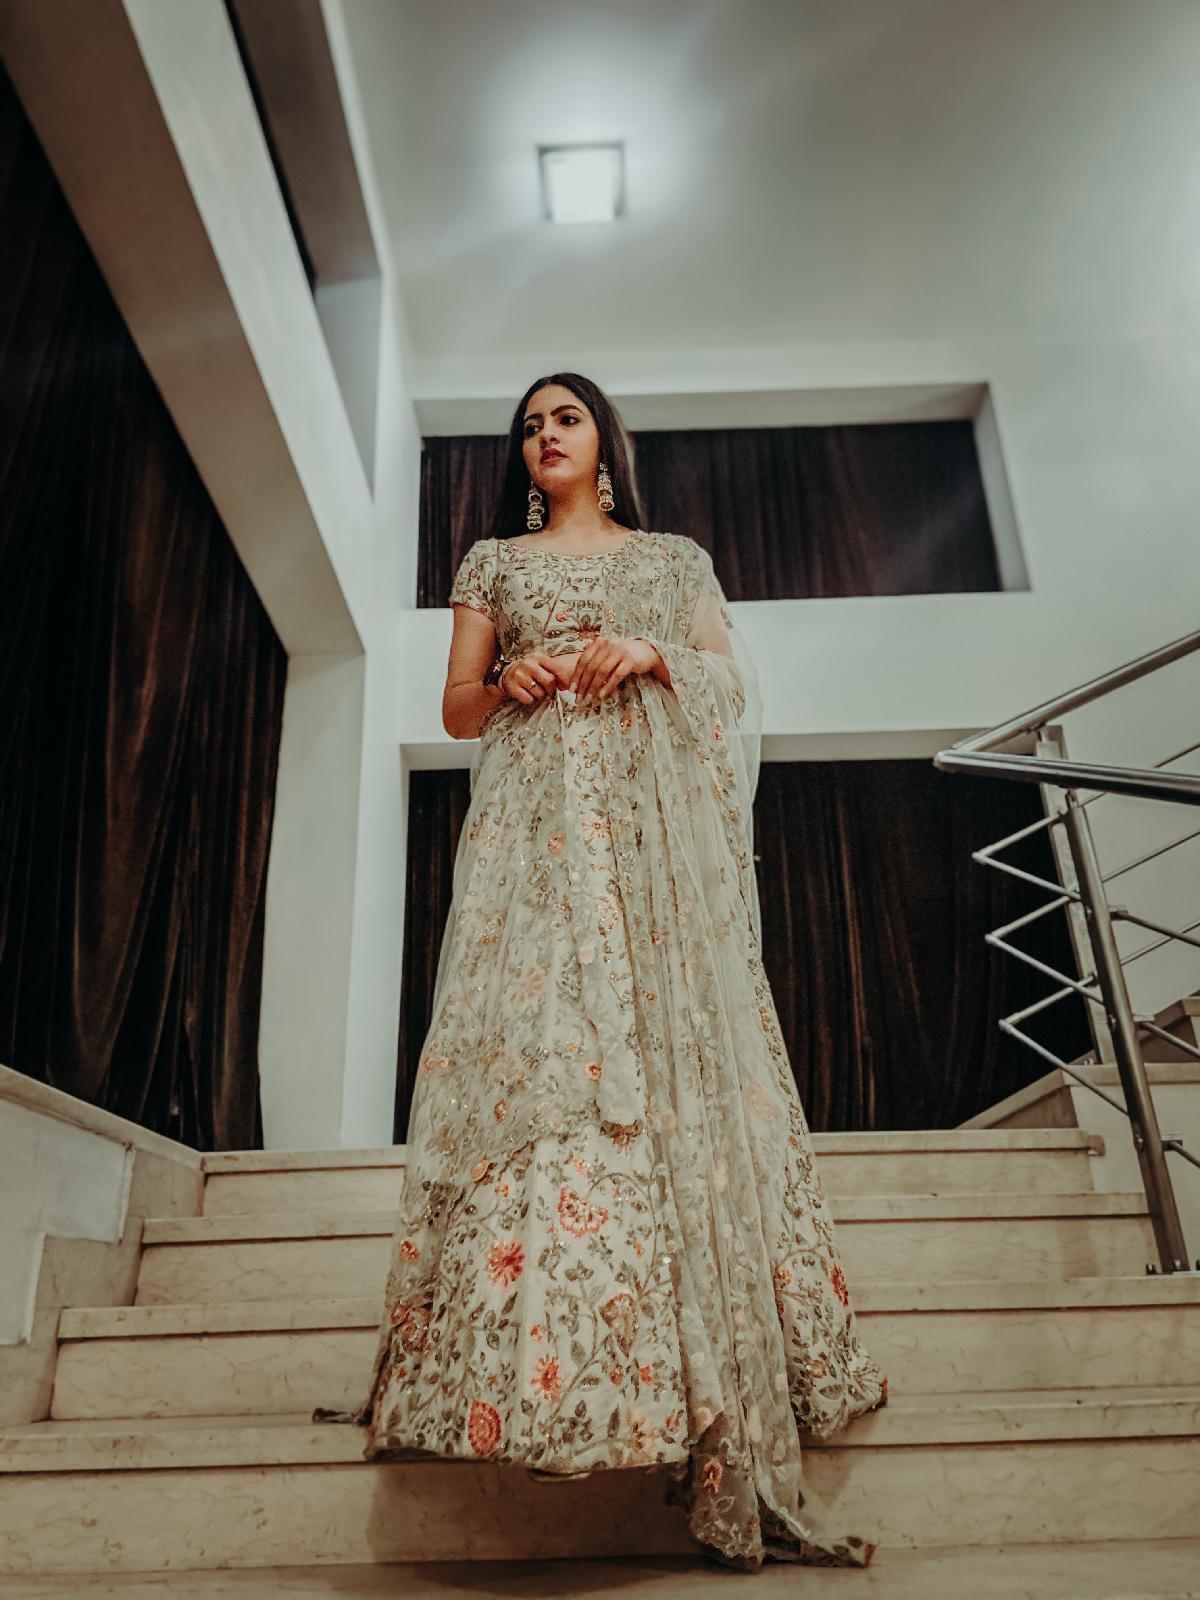 Top Bridal Wear On Rent in Surat - Best Bridal Lehenga On Hire - Justdial